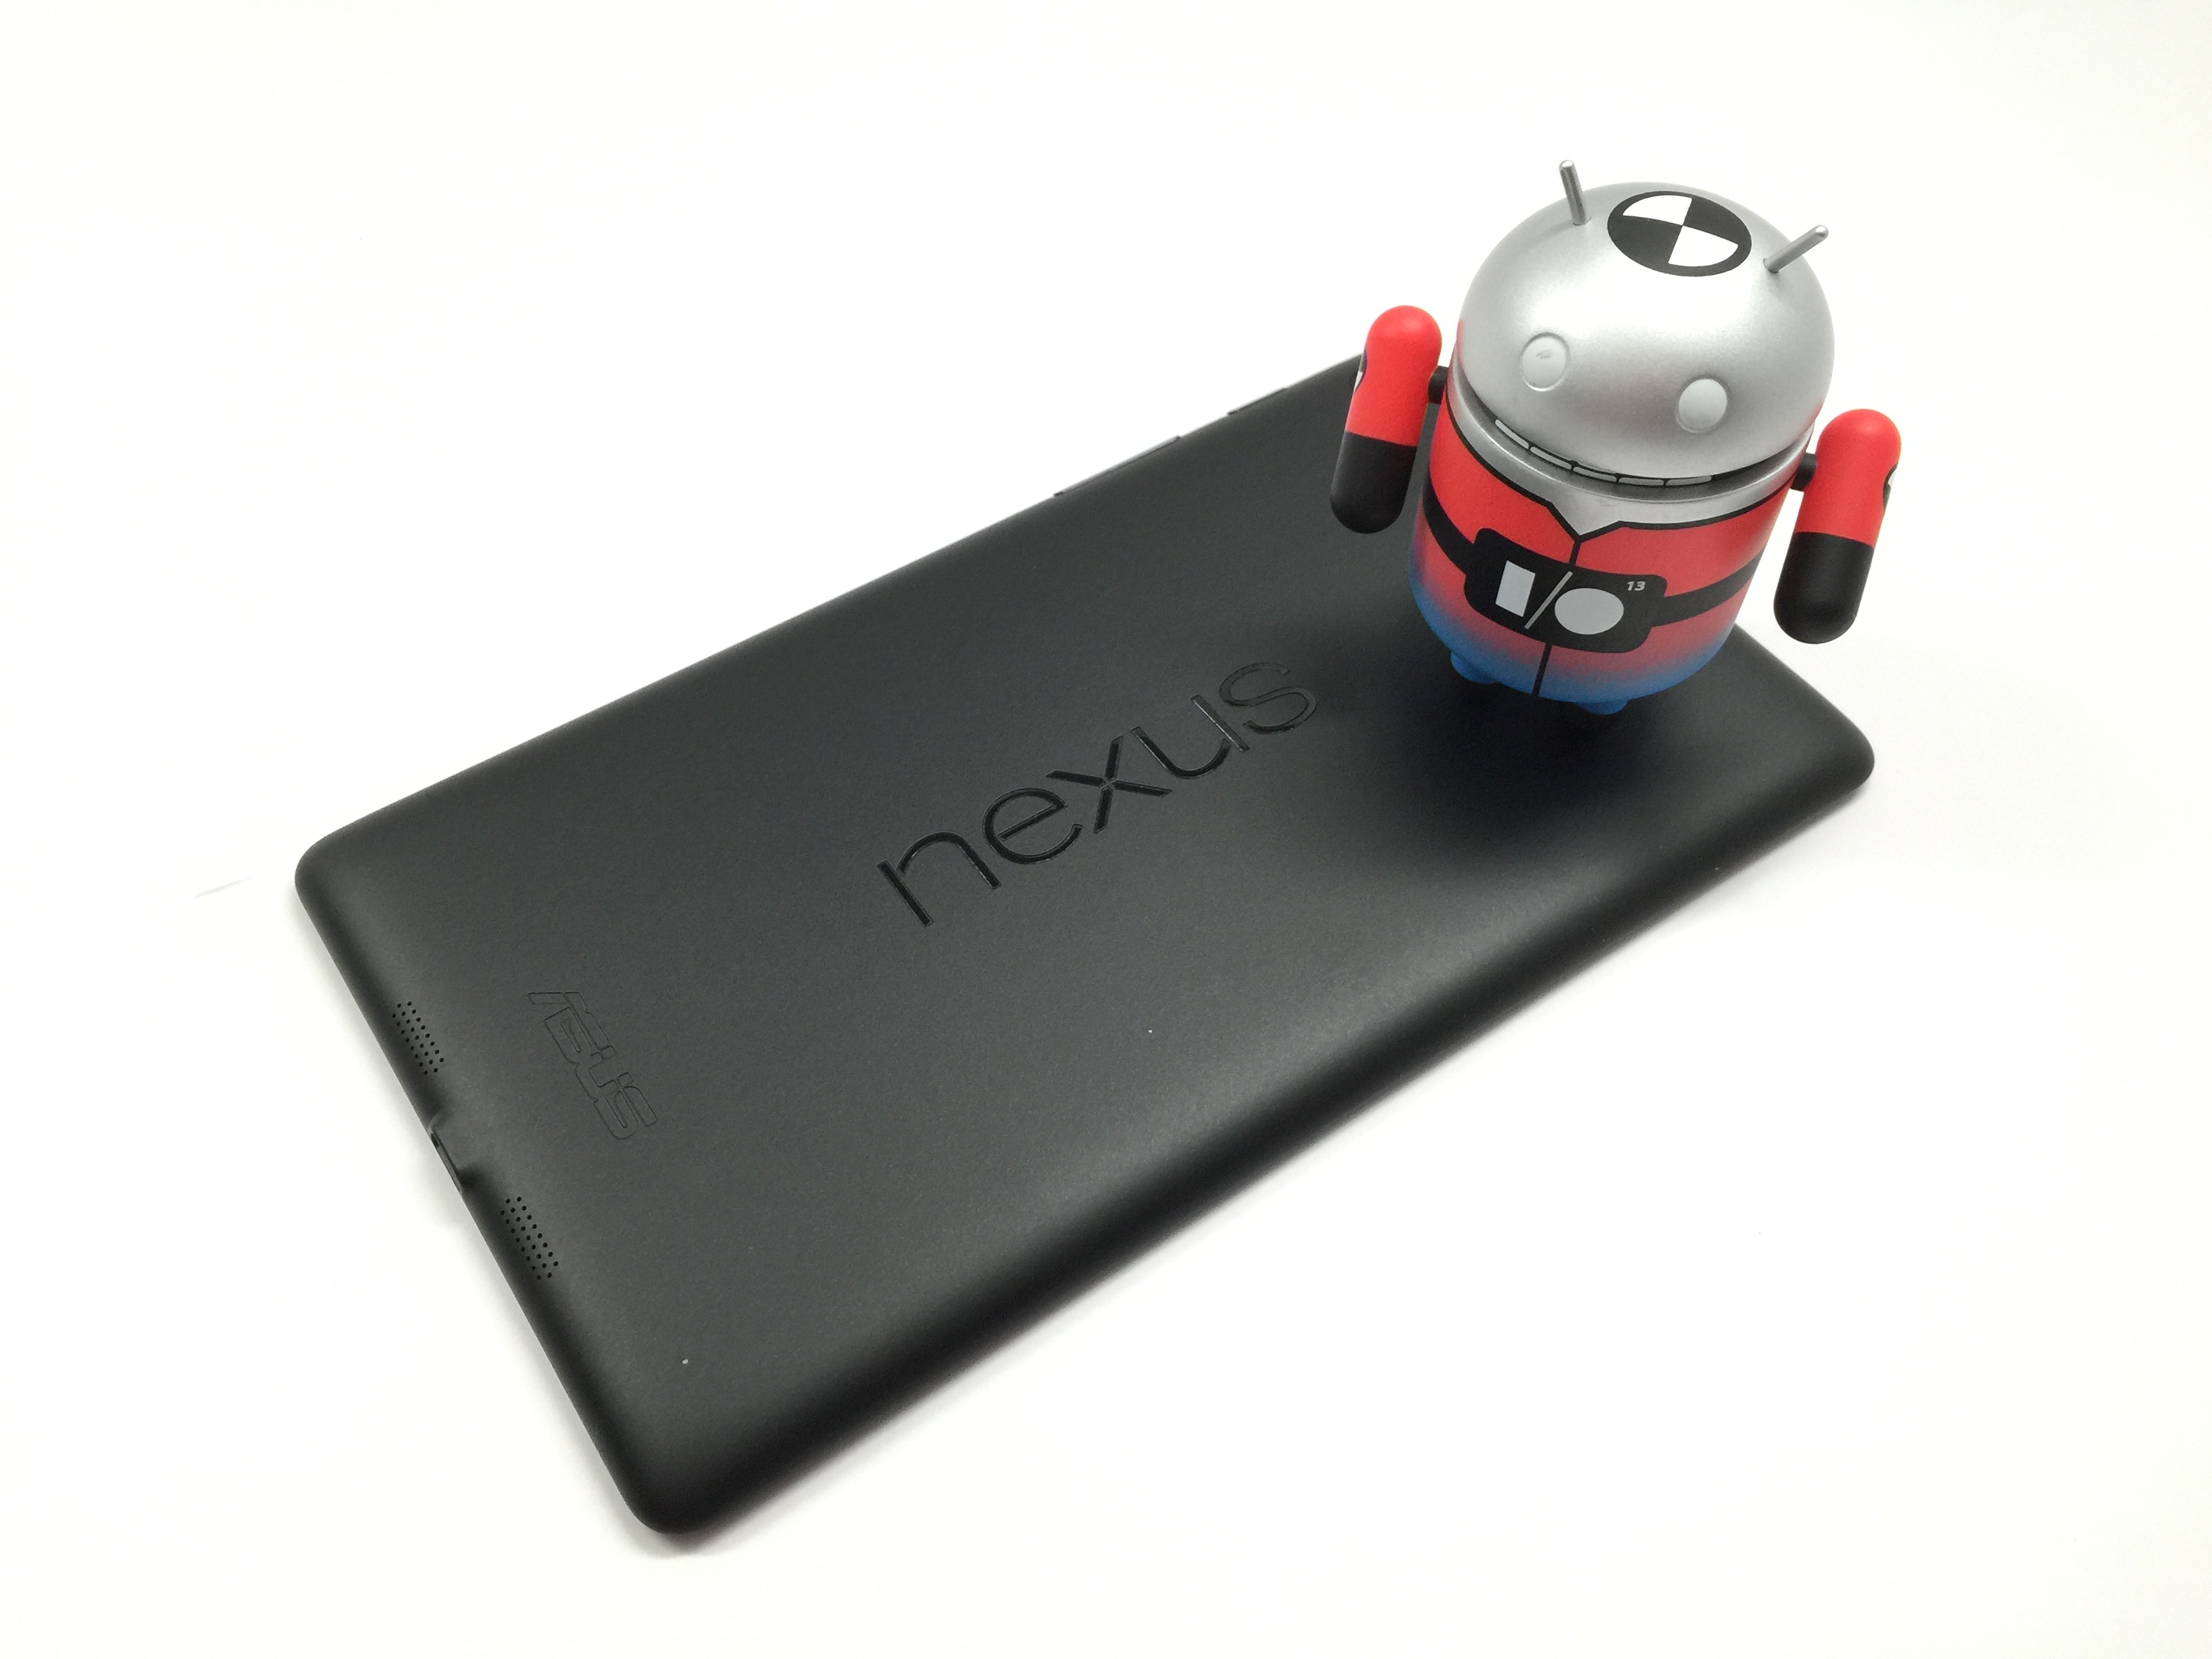 See how the Android 5.0.1 Lollipop update performs on the Nexus 7 2013.